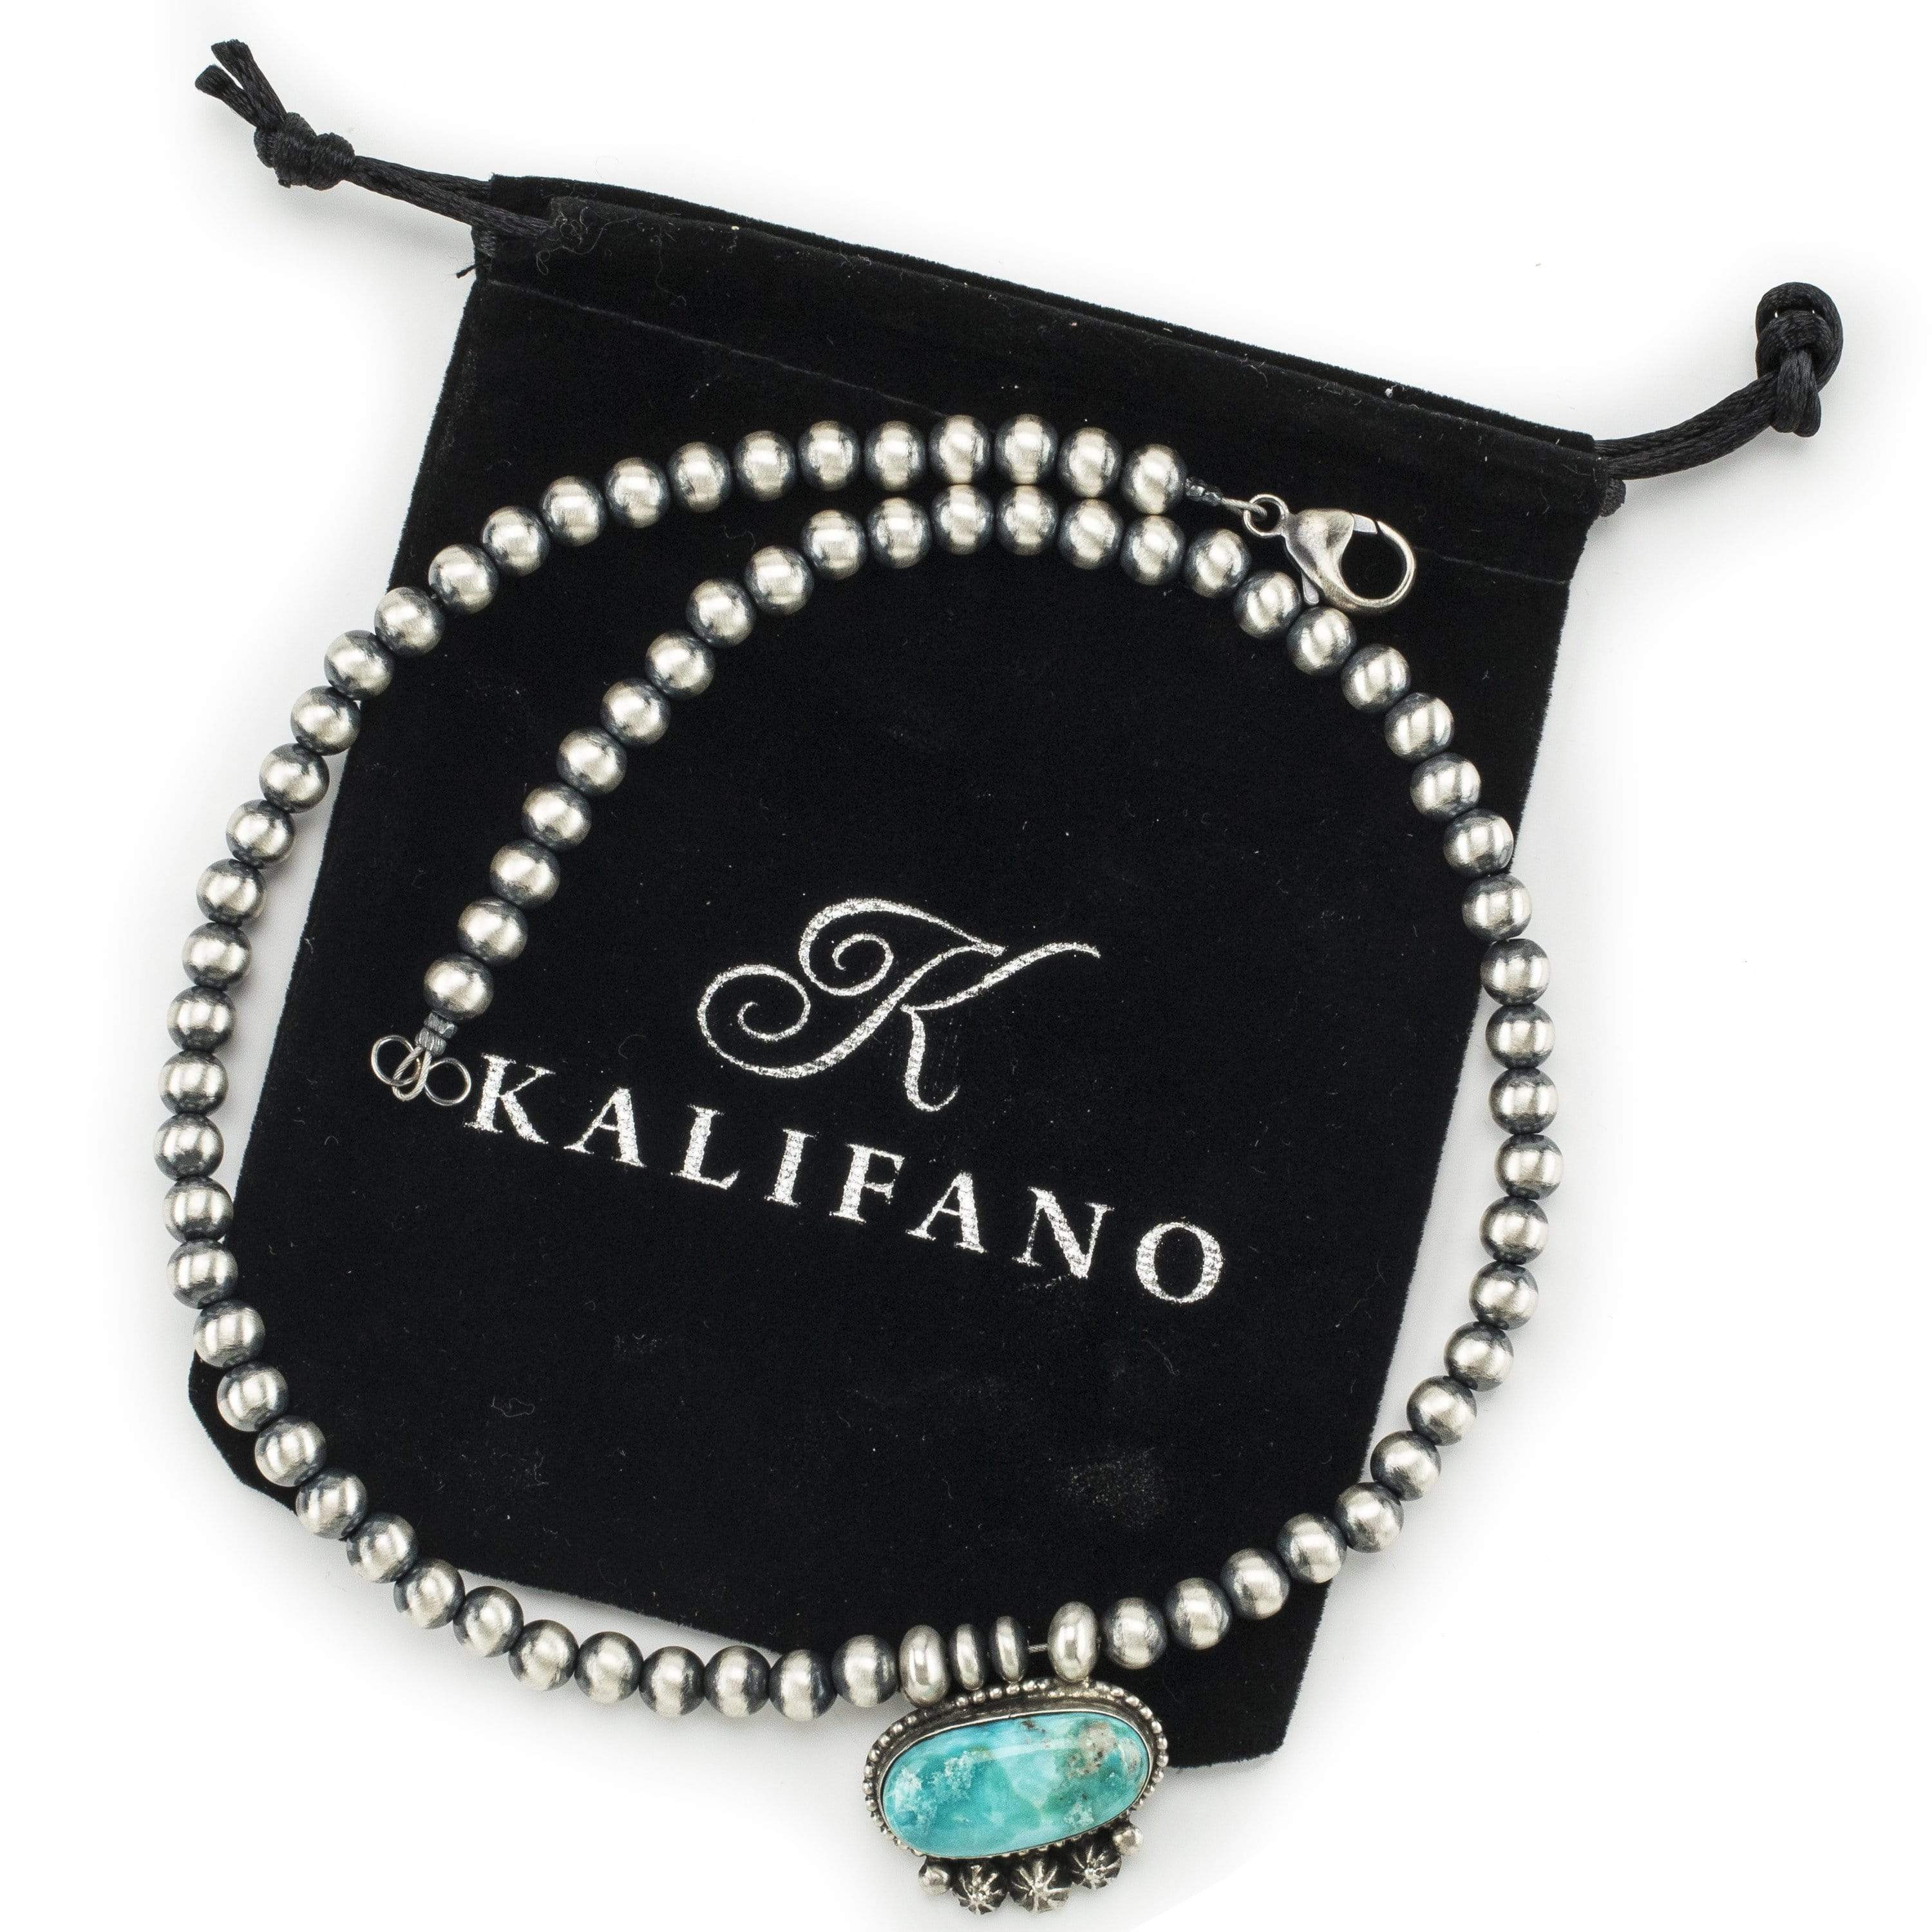 Kalifano Native American Jewelry Kee-J Sonoran Rose Turquoise Pendant and Attached Navajo Pearl USA Native American Made 925 Sterling Silver Necklace NAN1300.002